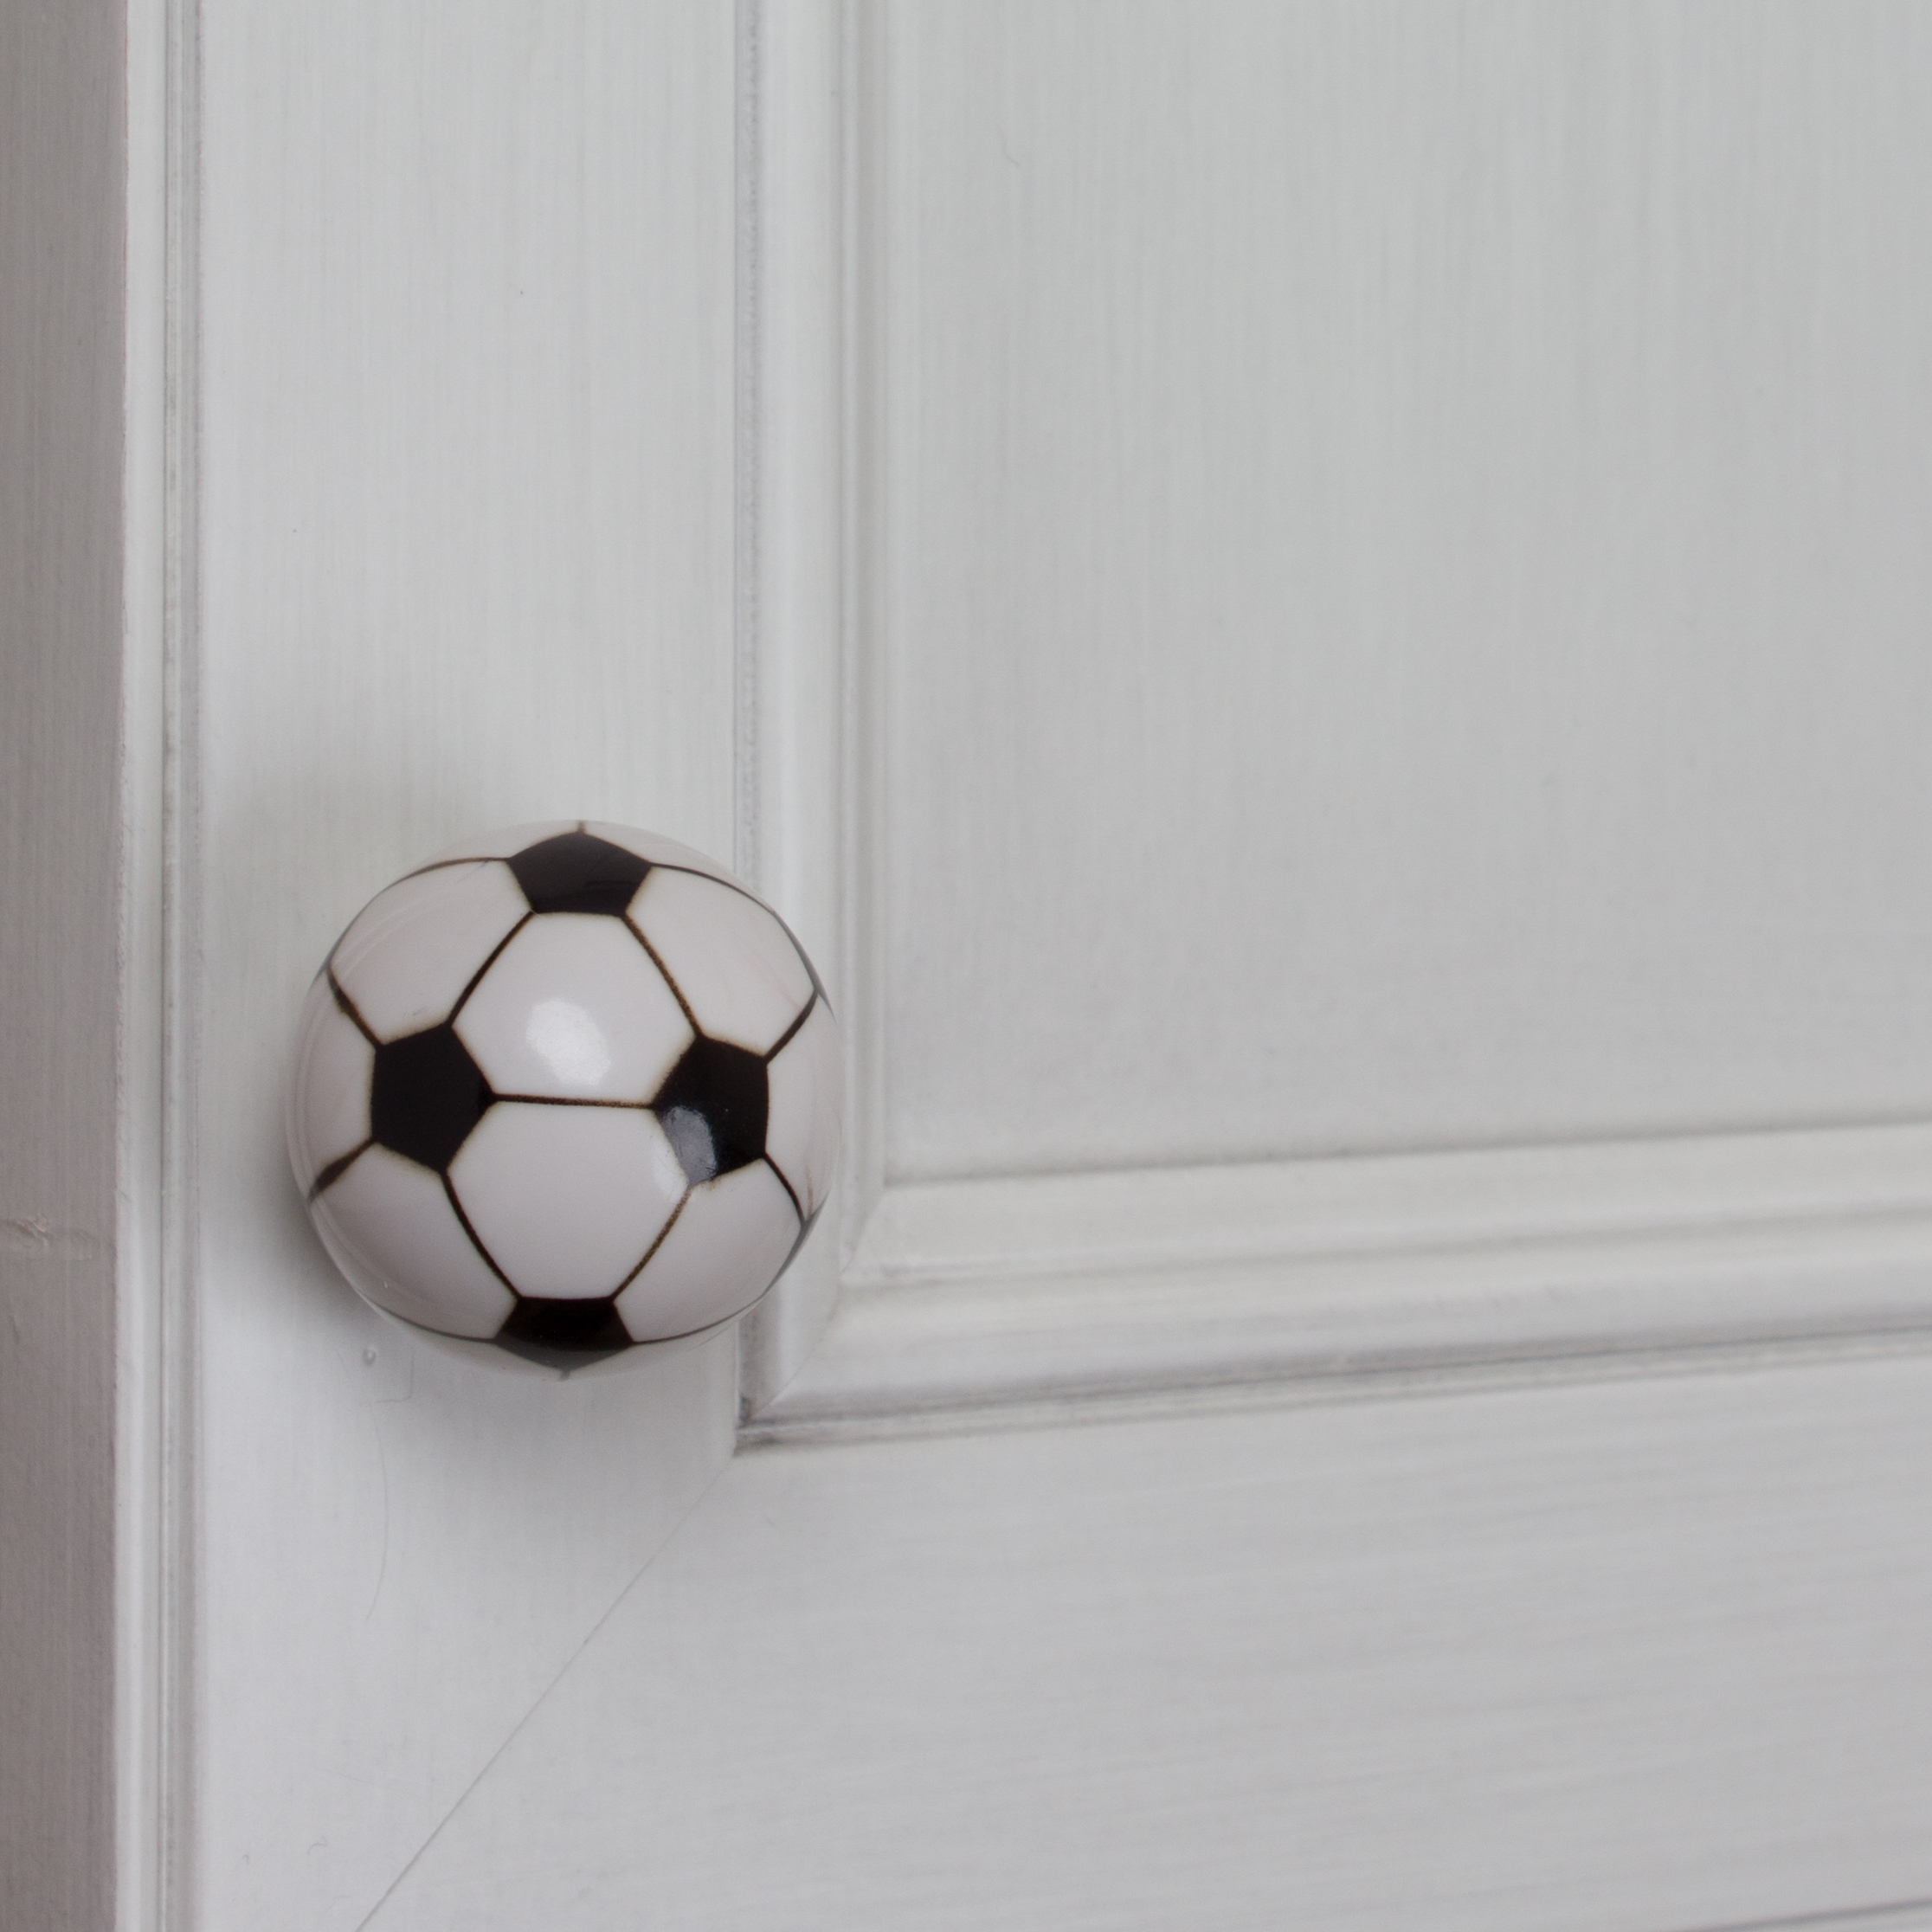 GlideRite 1-1/4 in. Soccer Ball Sports Dresser Drawer Cabinet Knobs, Pack of 25 - image 4 of 4